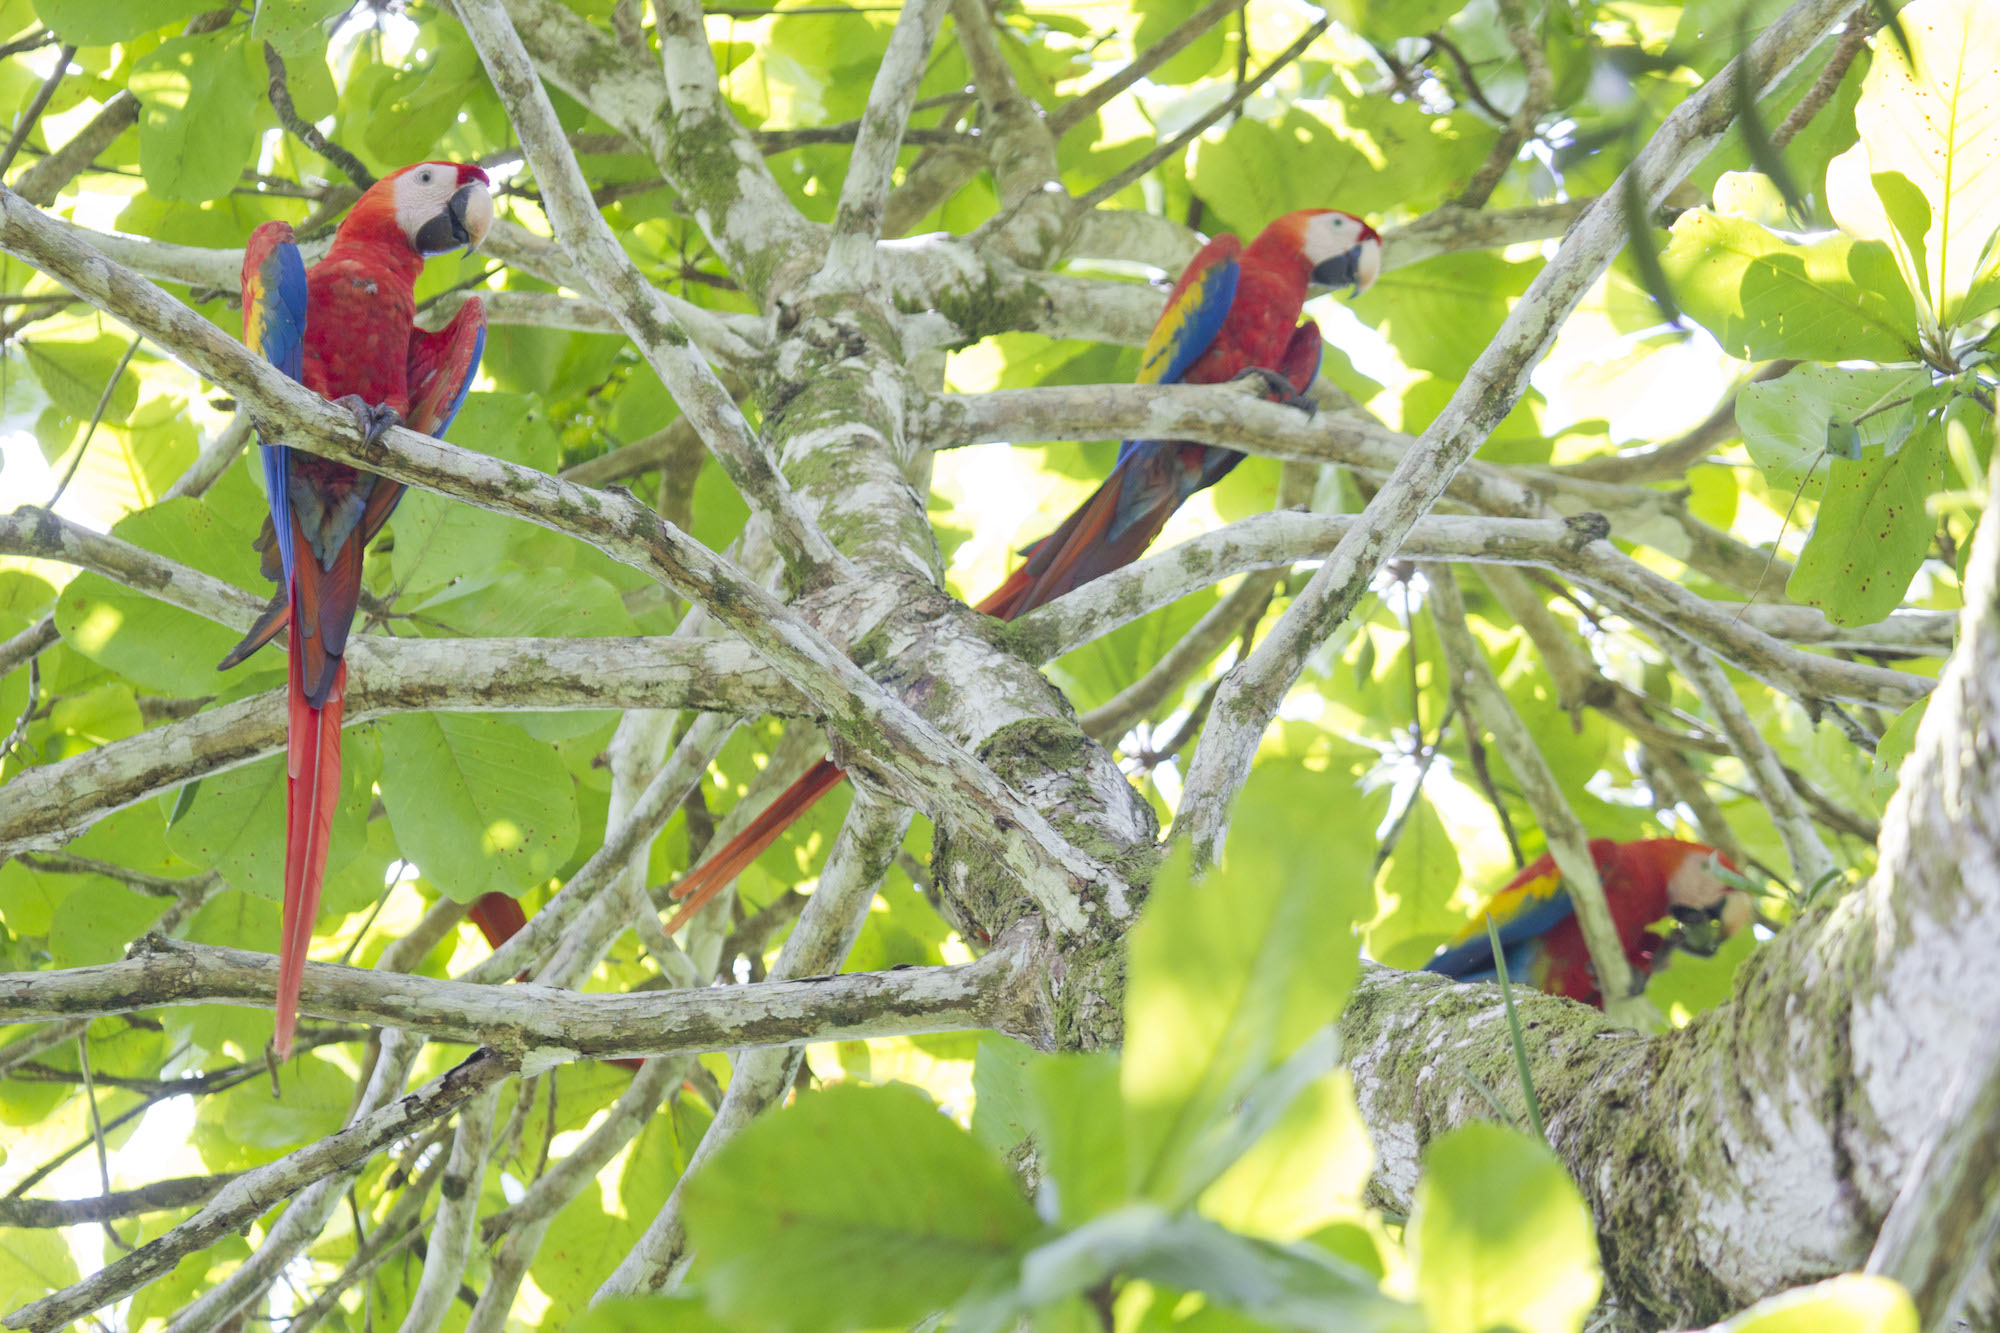 A GAGGLE OF MACAWS (PHOTO BY HAL BRINDLEY)